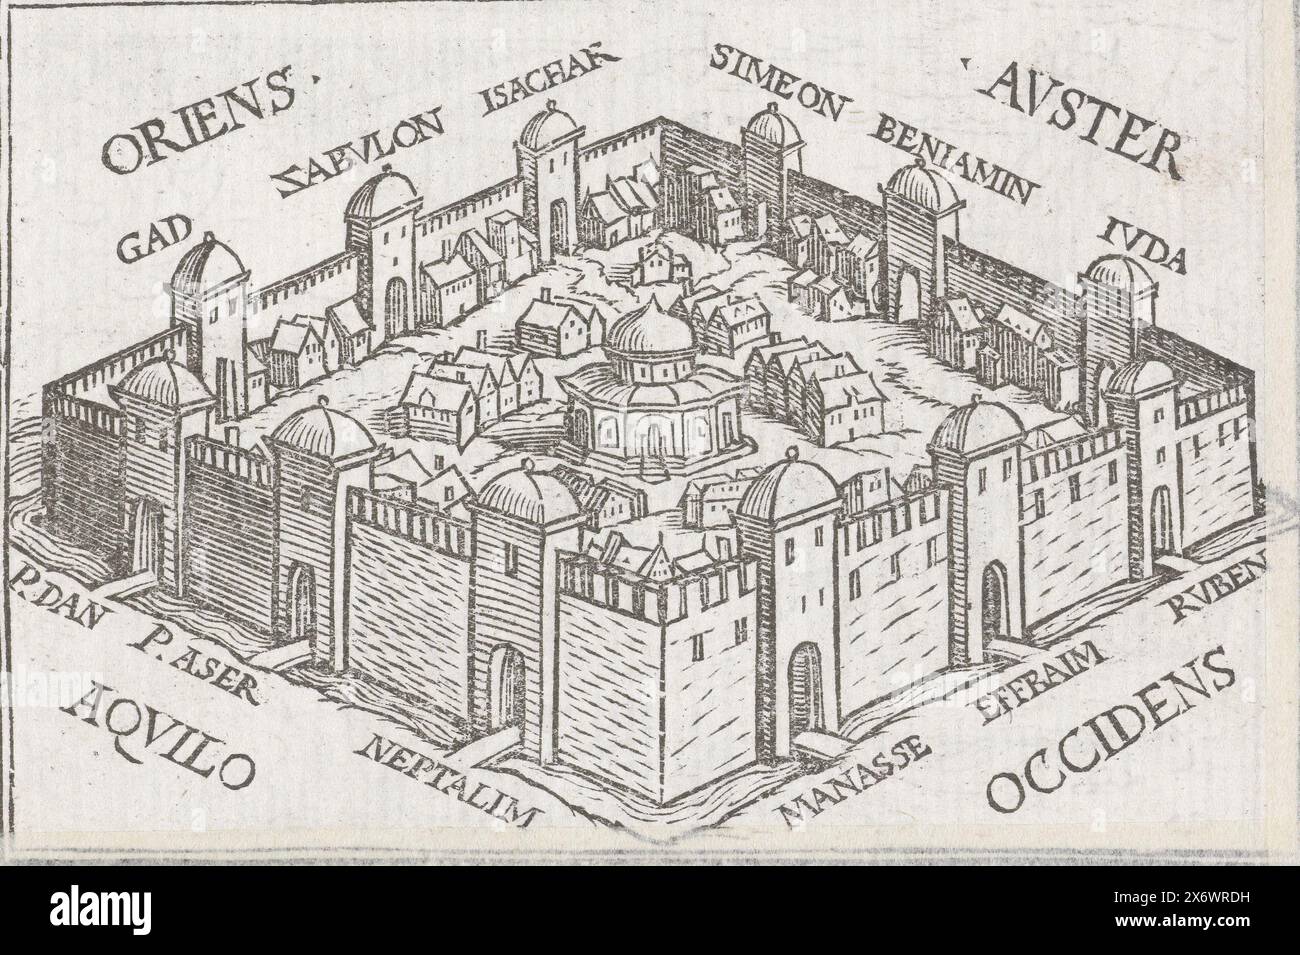 Heavenly city in vision of Ezekiel, The heavenly city with the new temple as Ezekiel sees it in a vision. The cardinal directions are indicated and the gates are labeled with the names of the tribes of Israel. In the margin above the image is the text Ezek. XLVII Stock Photo